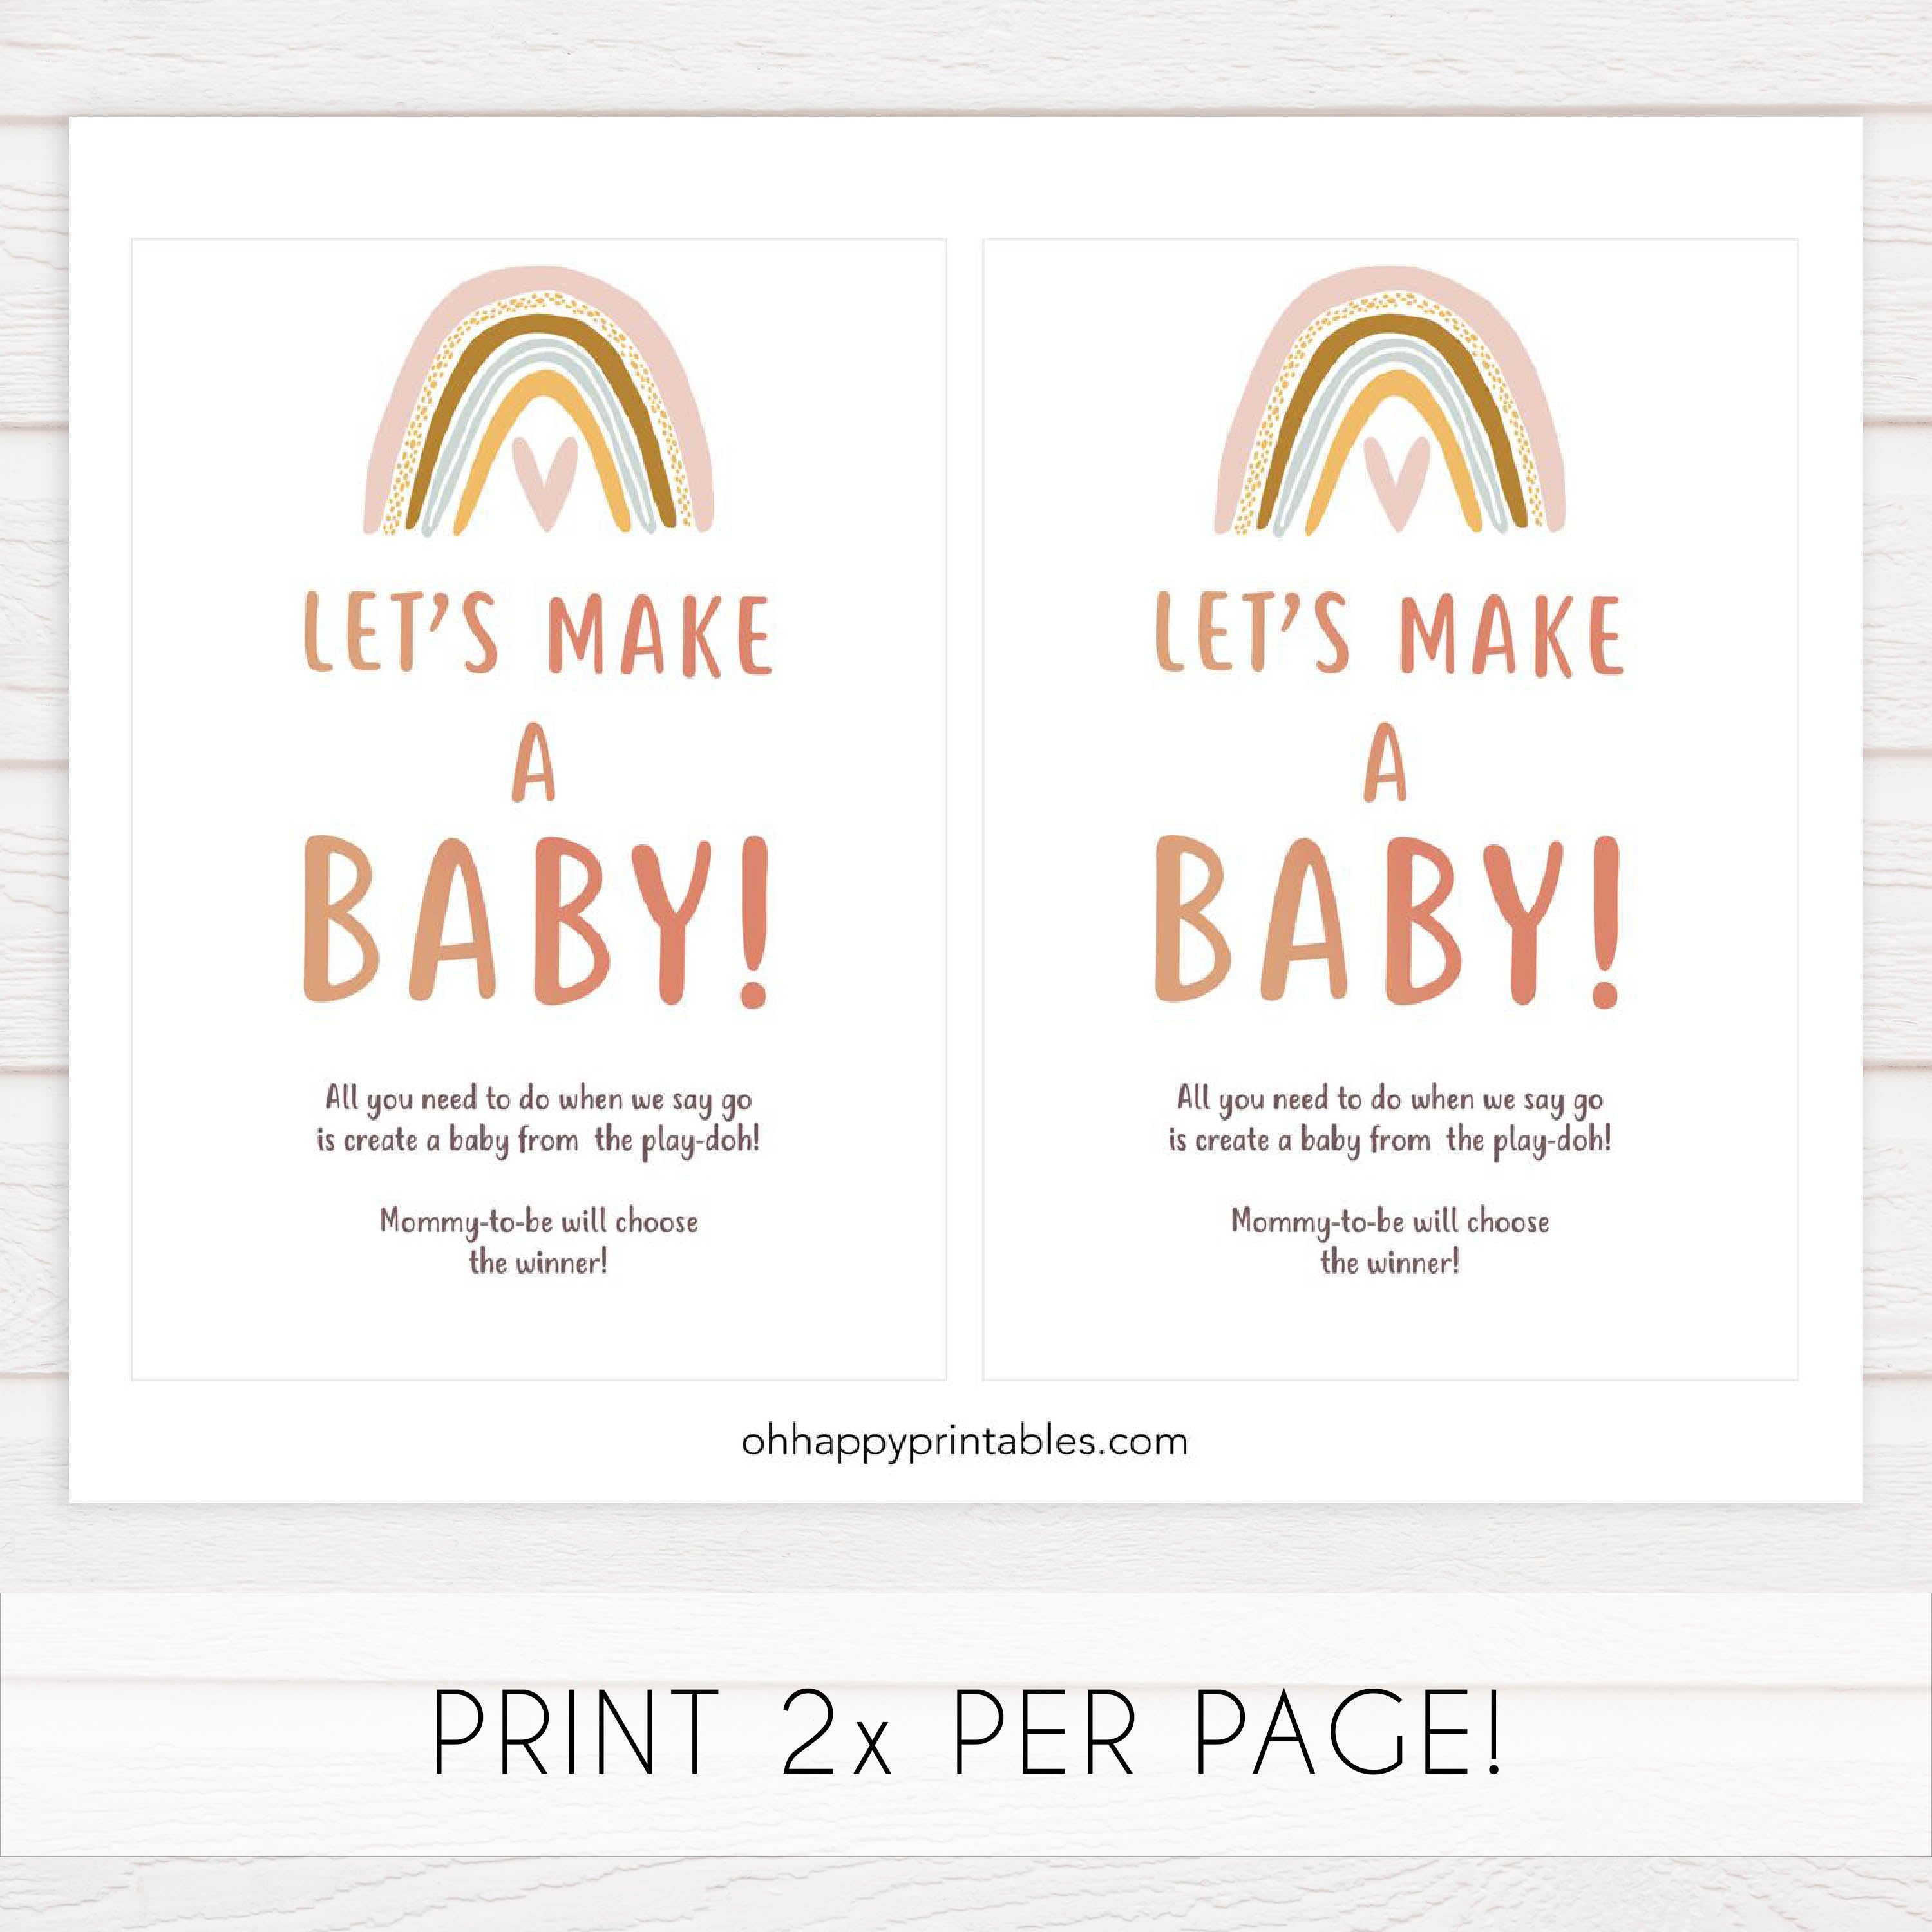 lets make a baby game, Printable baby shower games, boho rainbow baby games, baby shower games, fun baby shower ideas, top baby shower ideas, boho rainbow baby shower, baby shower games, fun boho rainbow baby shower ideas